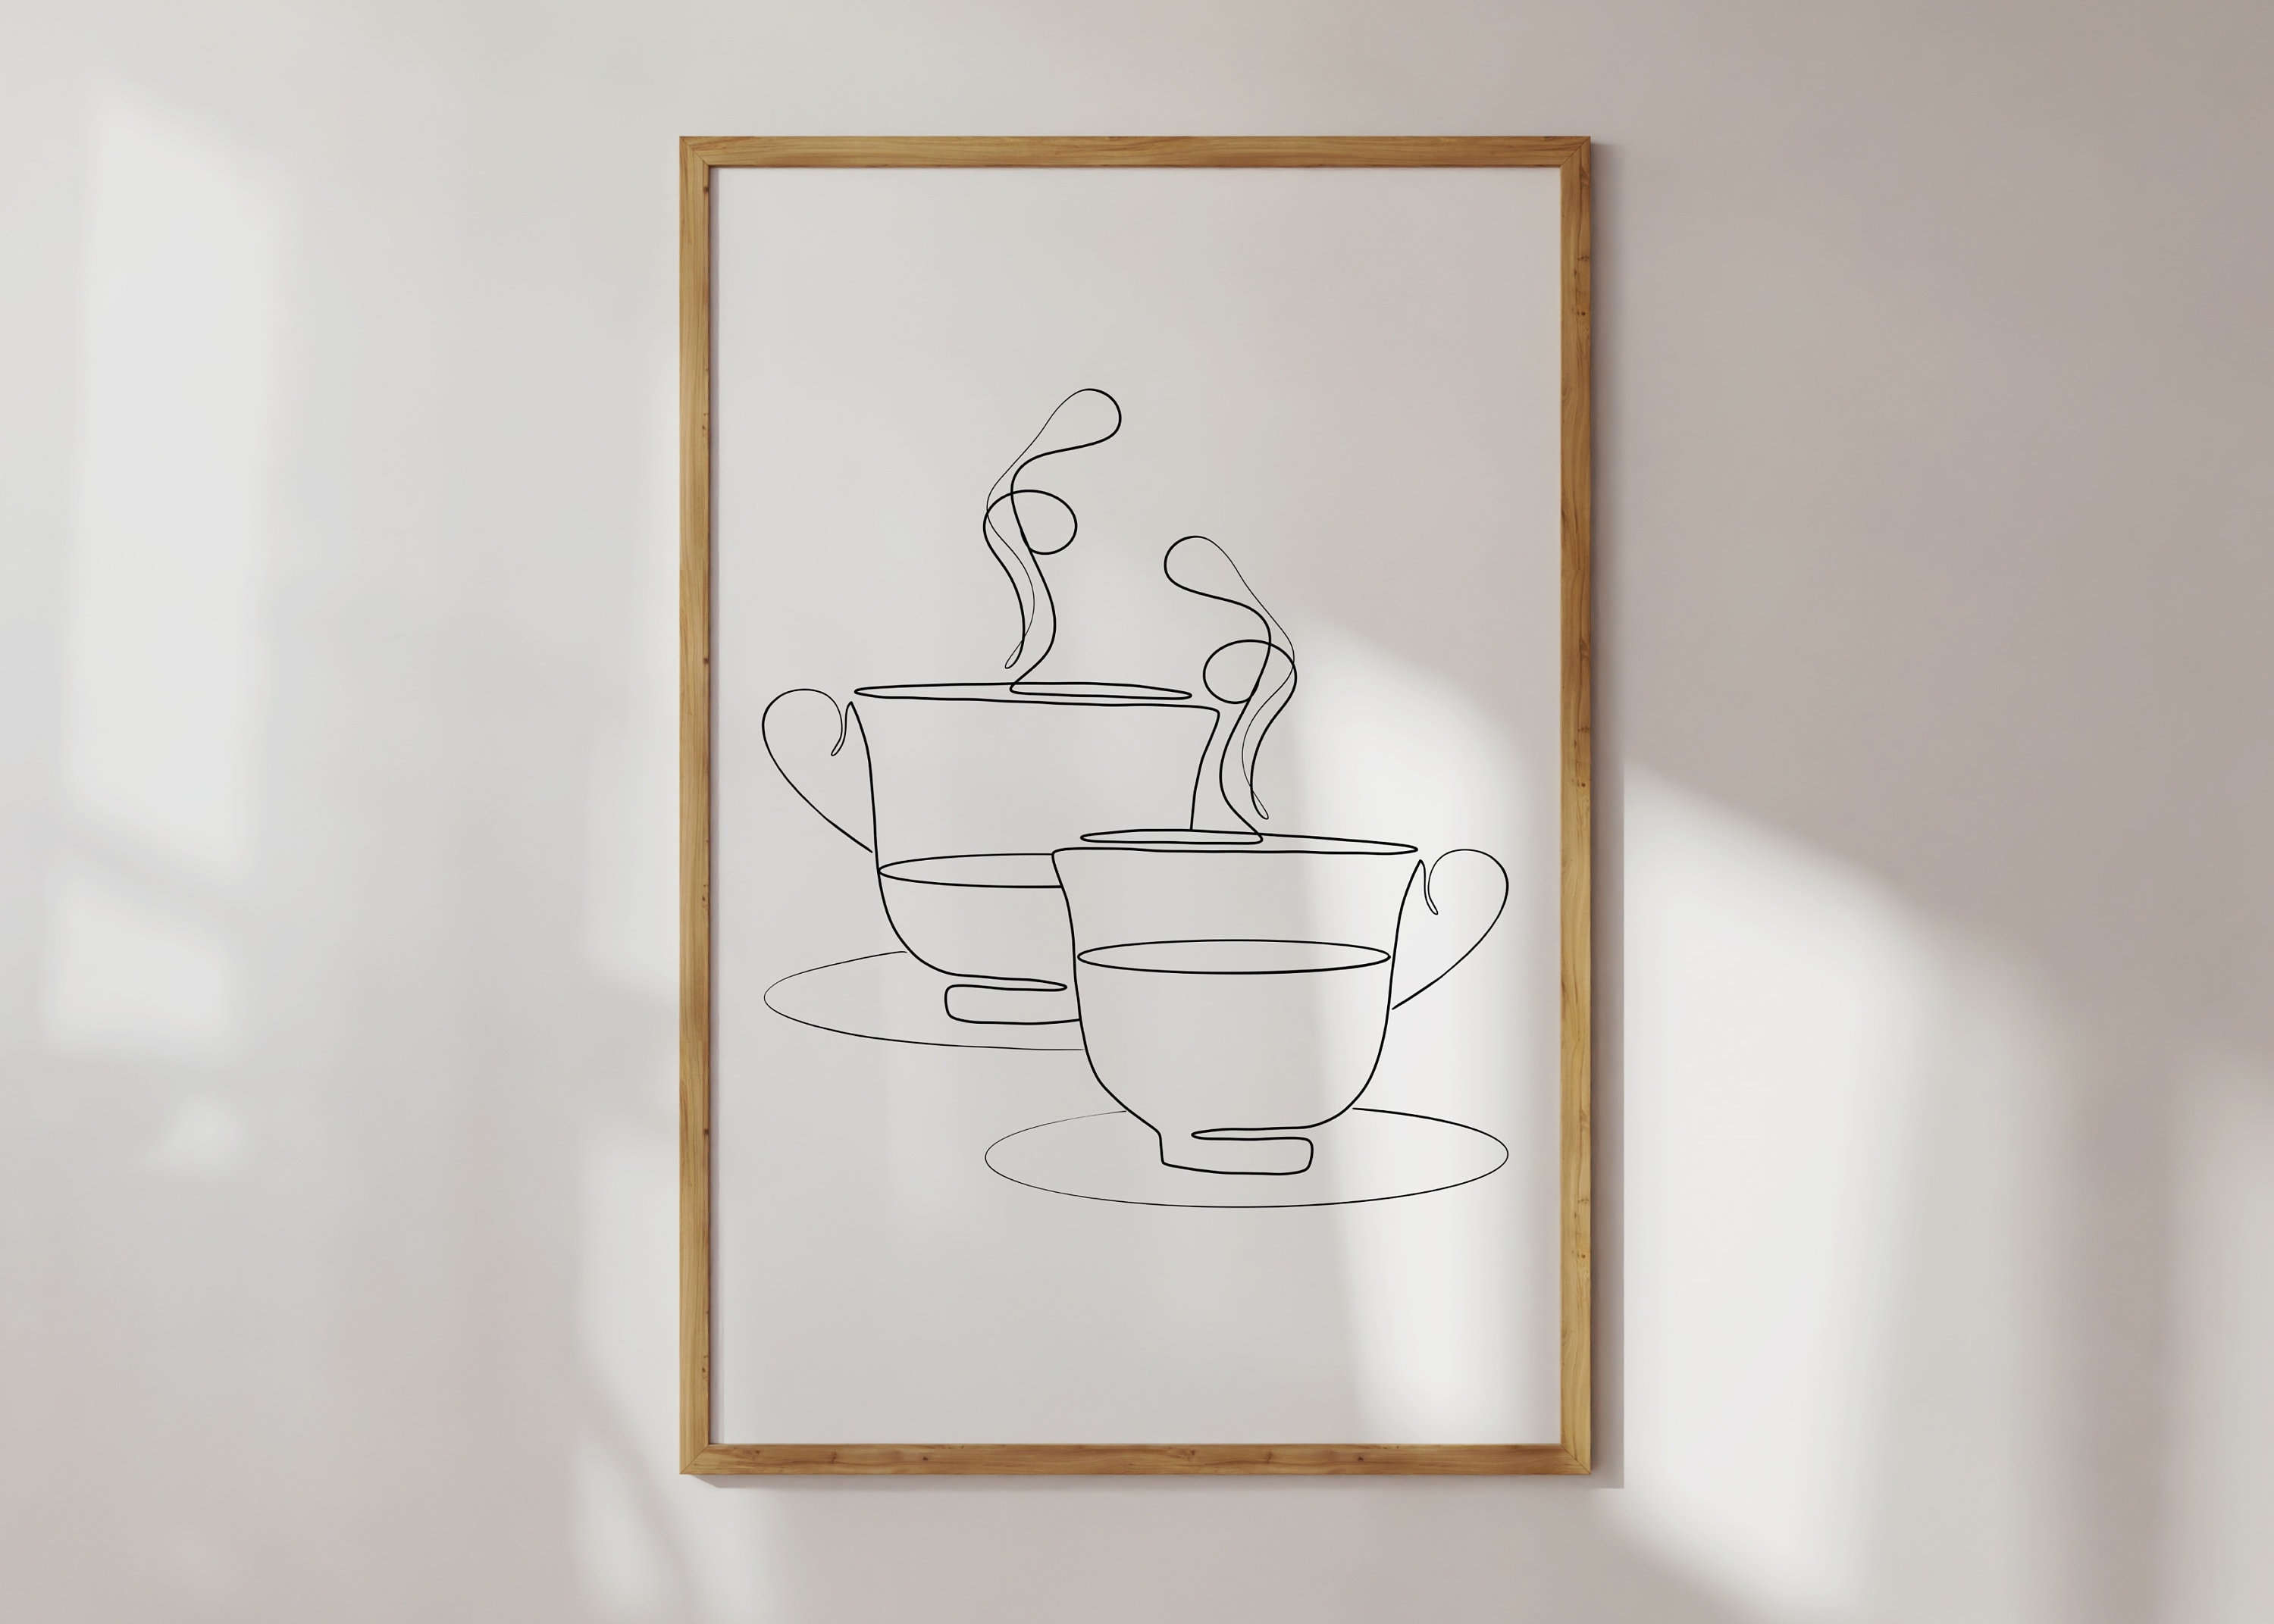 One line drawing coffee cup. Modern minimal art, aesthetic contour.  Continuous line mug with steam for logo, card, sticker, emblem, label,  prints, t-shirt design, poster, banner. Vector illustration Stock Vector